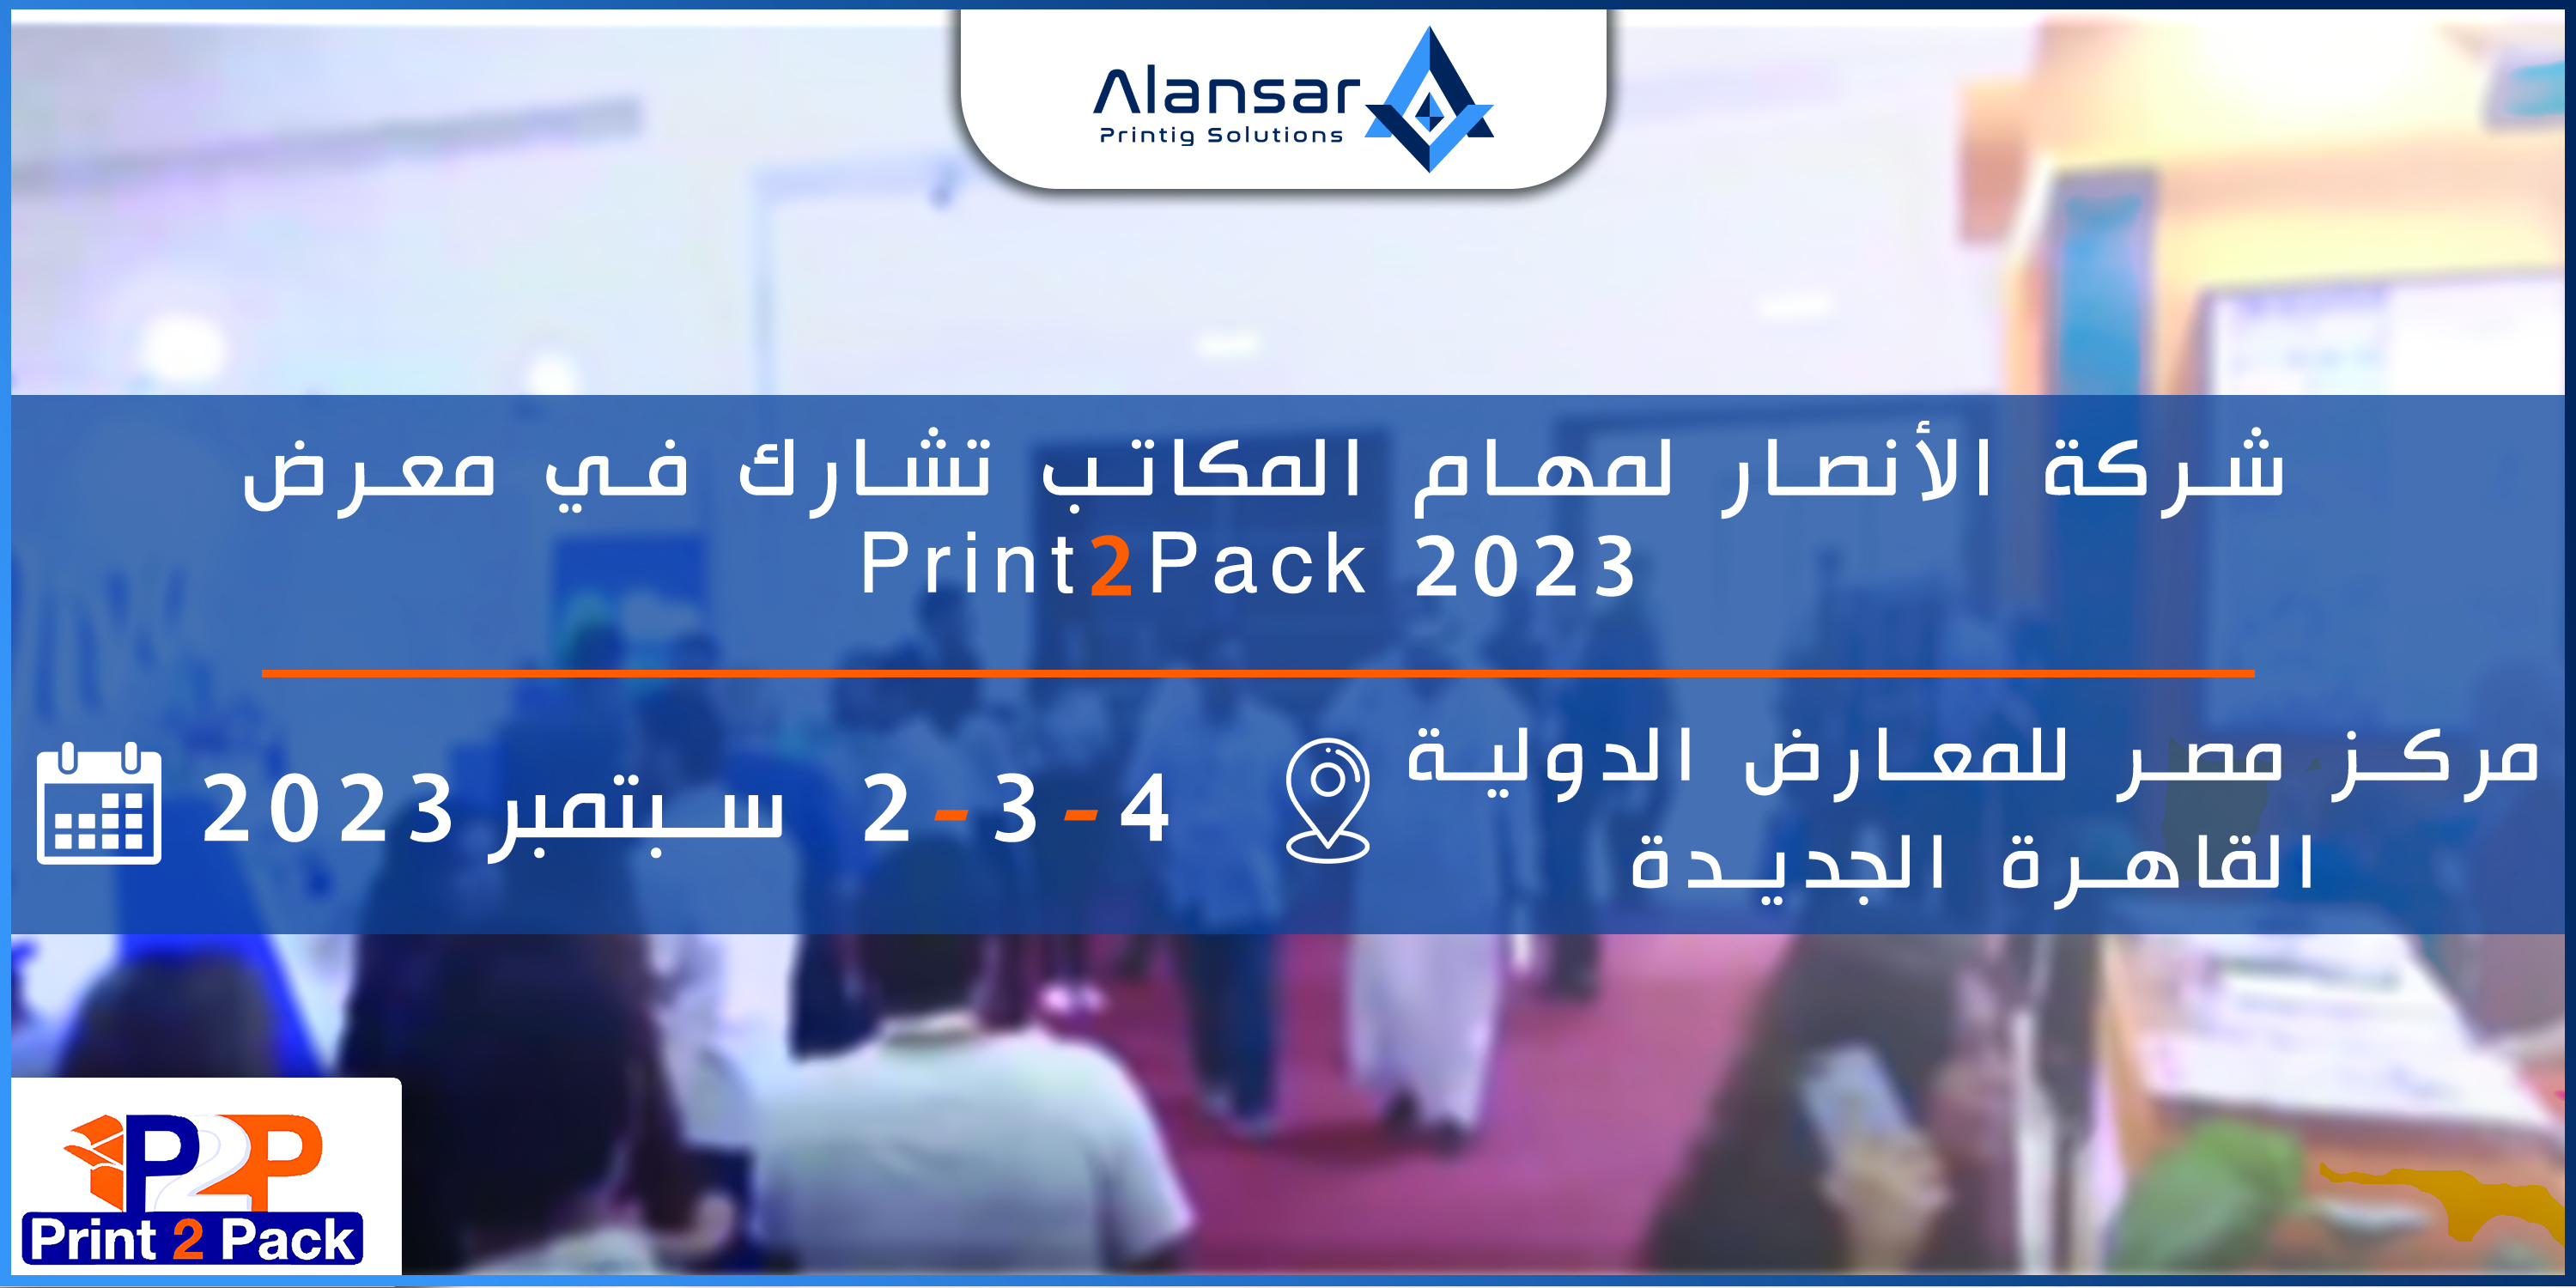 Ansar Company participates in the Print2Pack 2023 exhibition